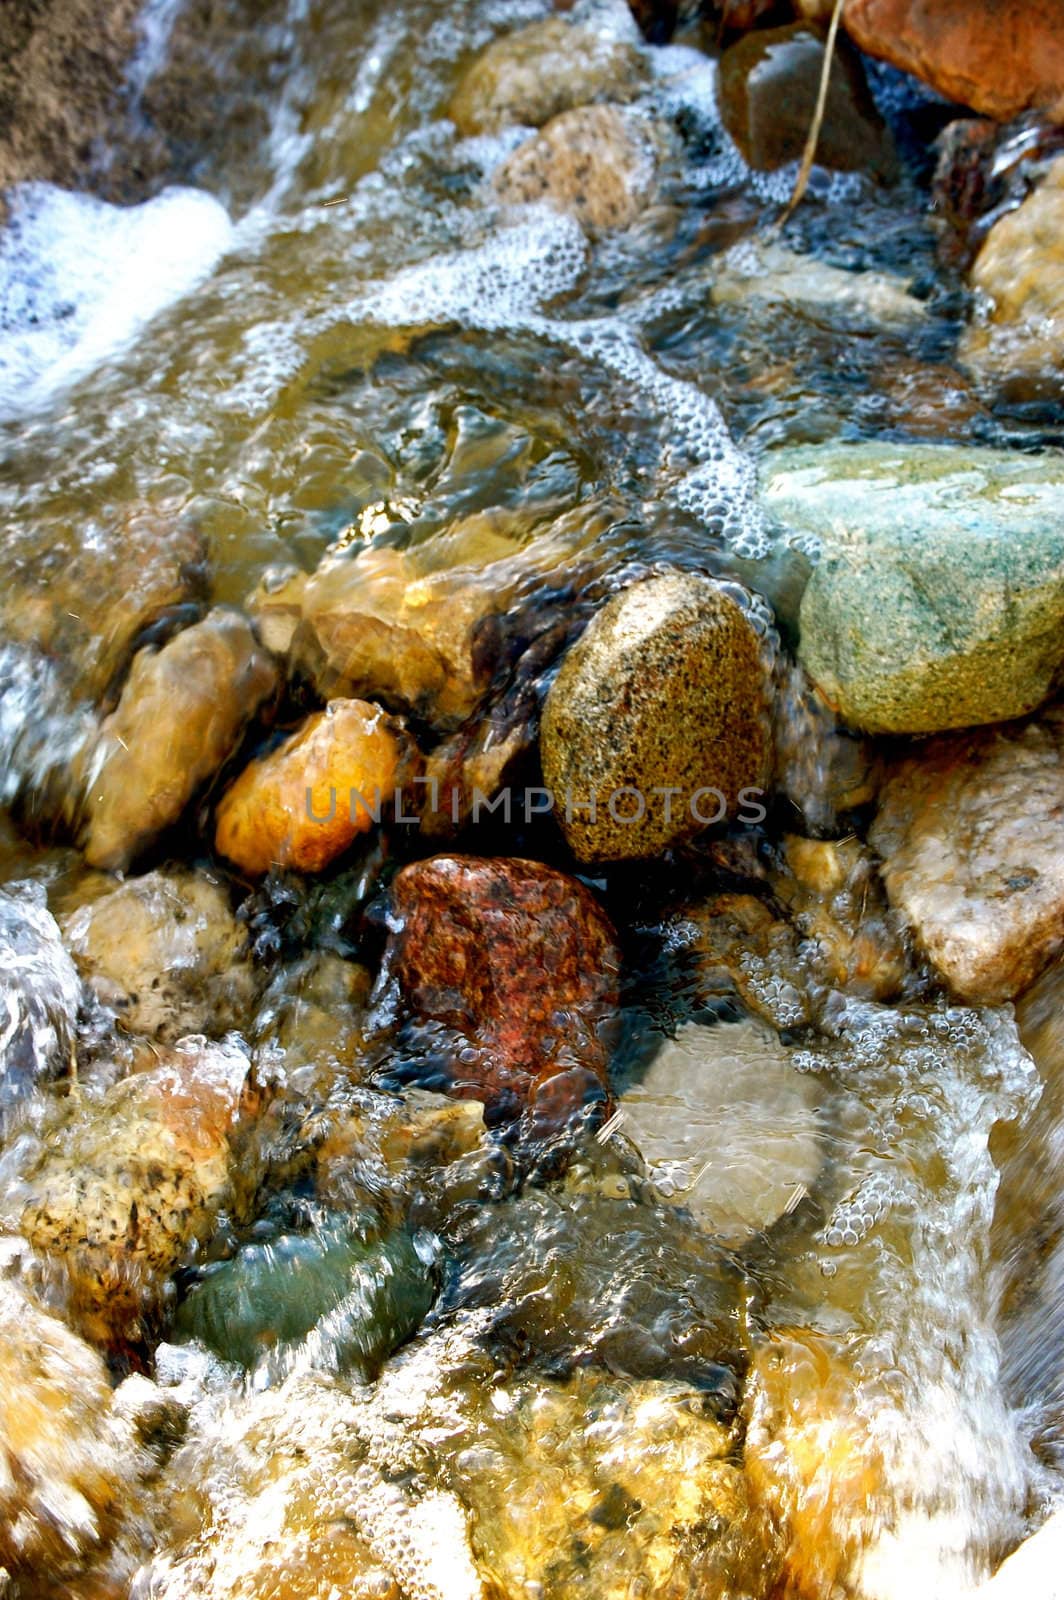 Rocks and water by RefocusPhoto